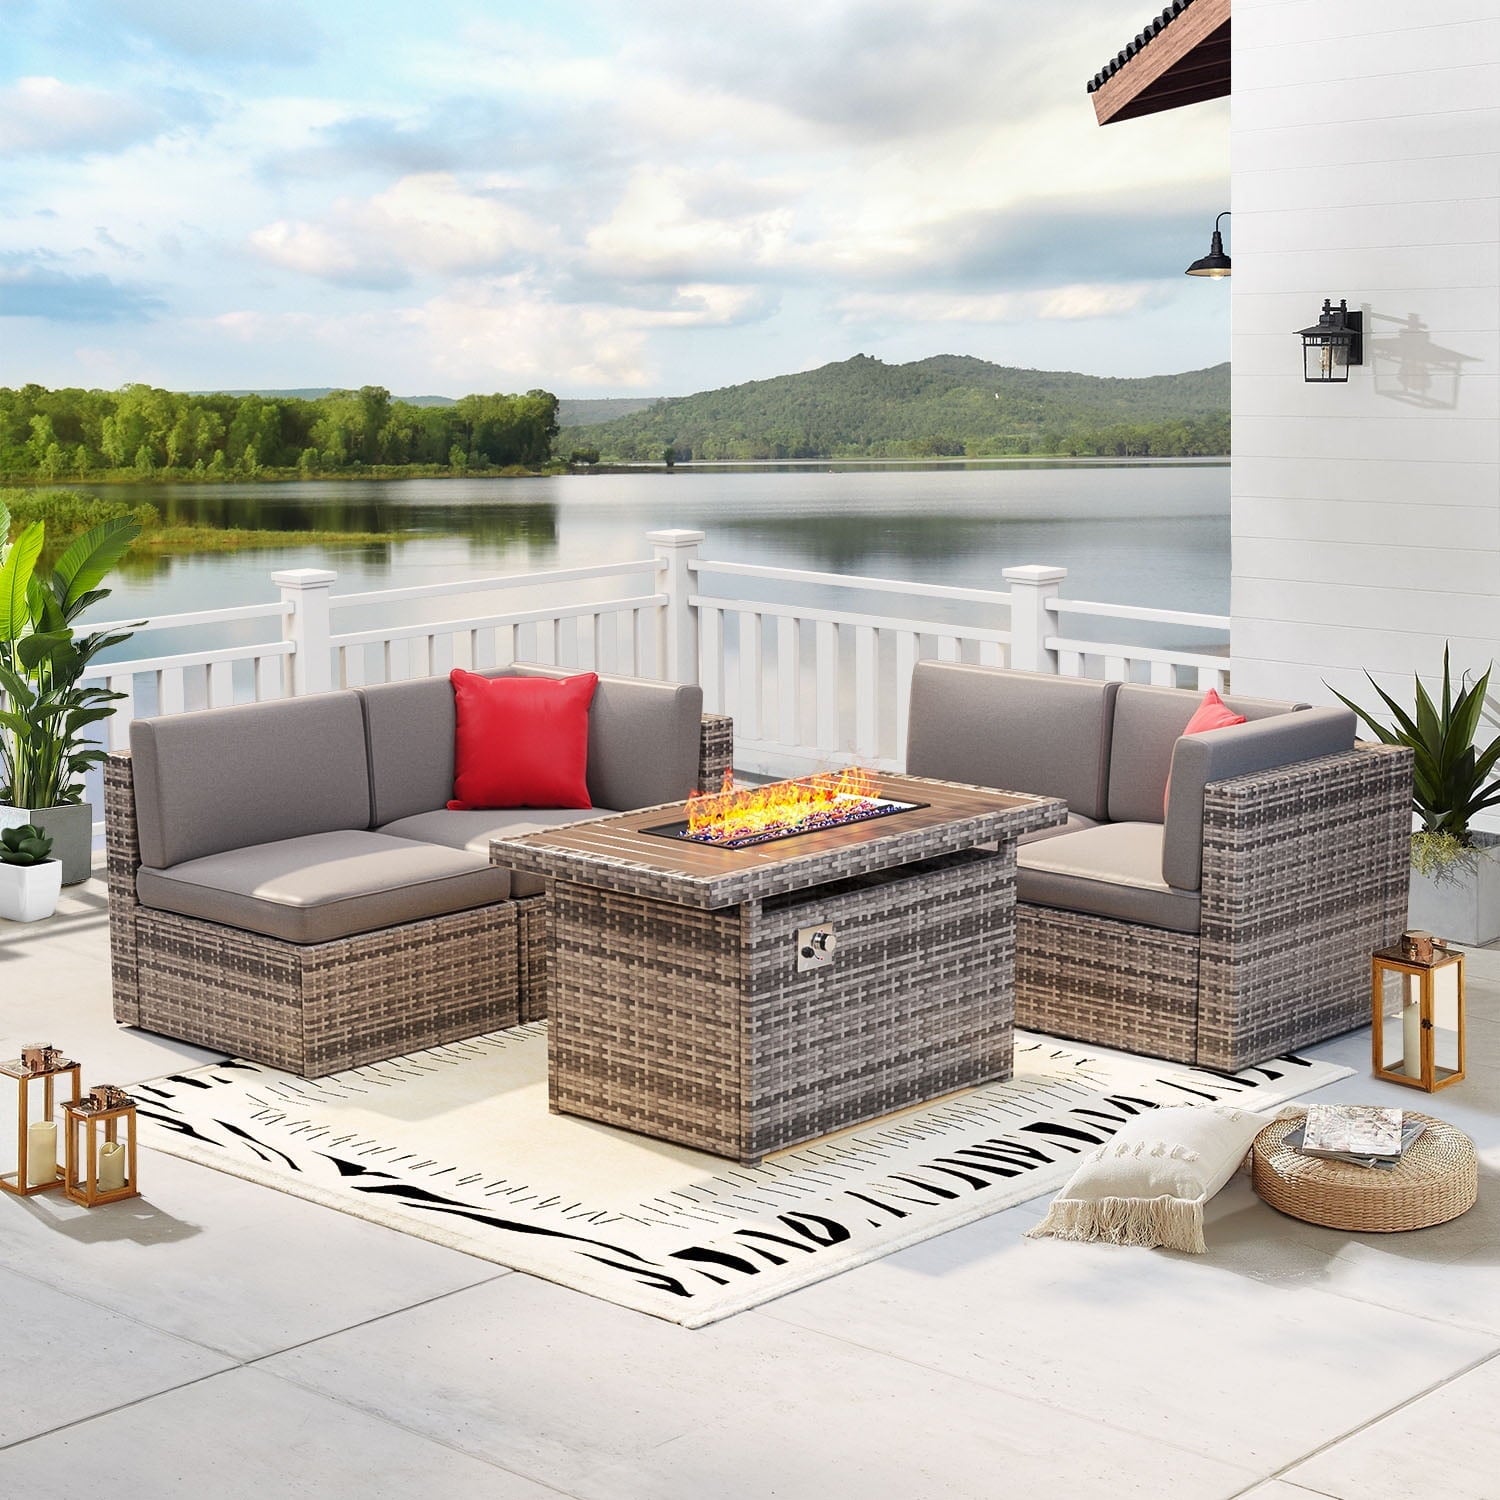 5 Piece Patio Furniture Set, Outdoor Patio Furniture Sets with Fire Pit, Wicker Patio Furniture, Outdoor Conversation Set with Gray Cushions (4.2) 4.2 stars out of 81 reviews 81 reviews